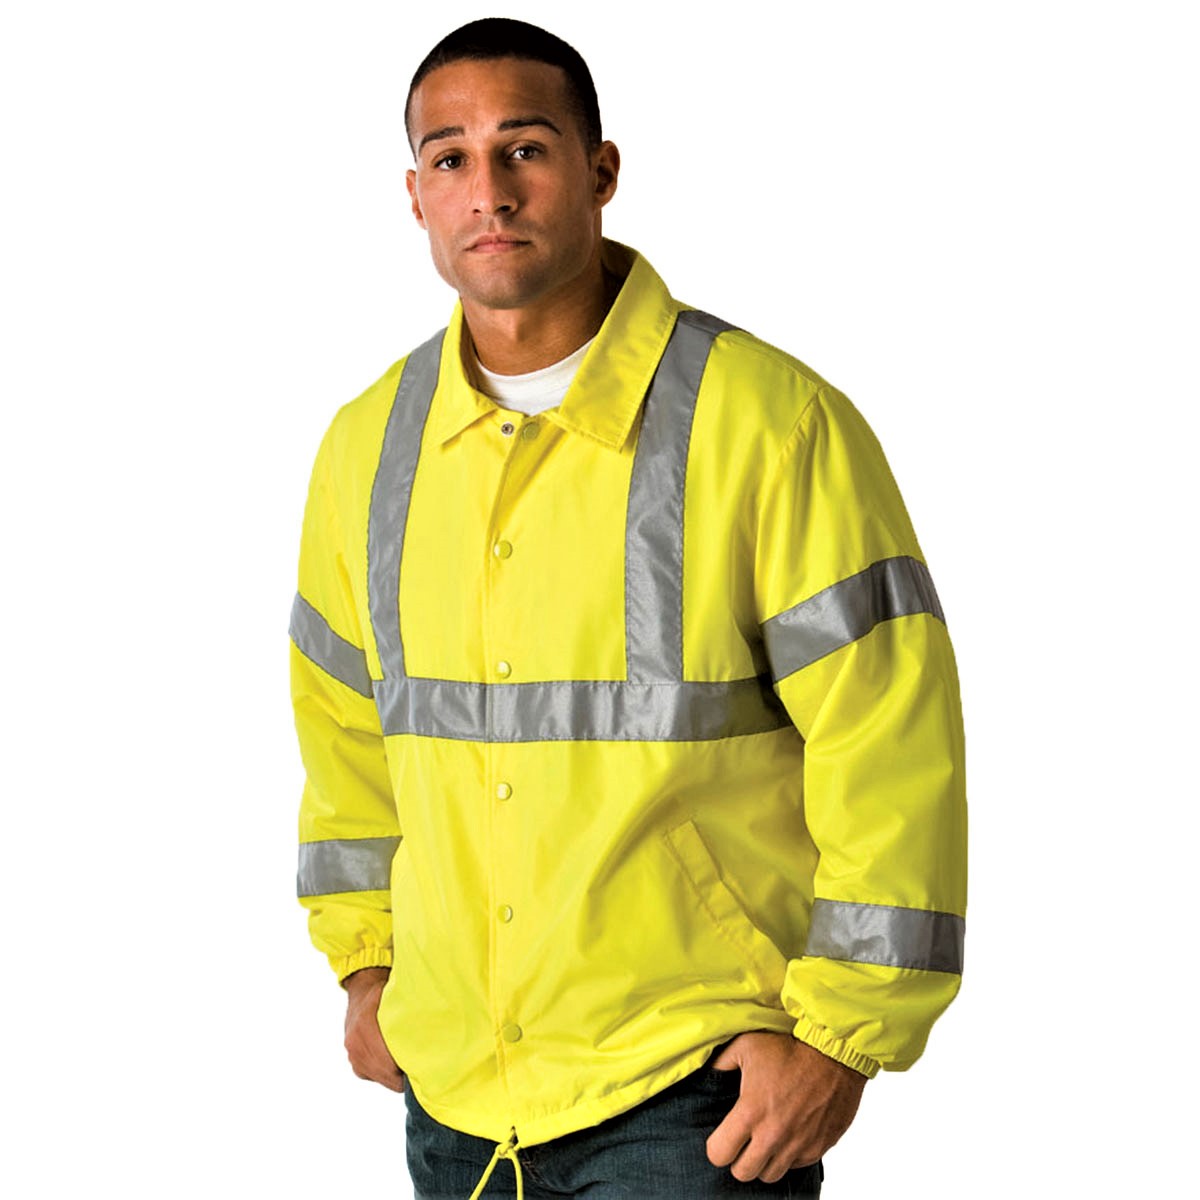 Occunomix LUX-WCVL High Visibility Winter Coverall Medium Yellow